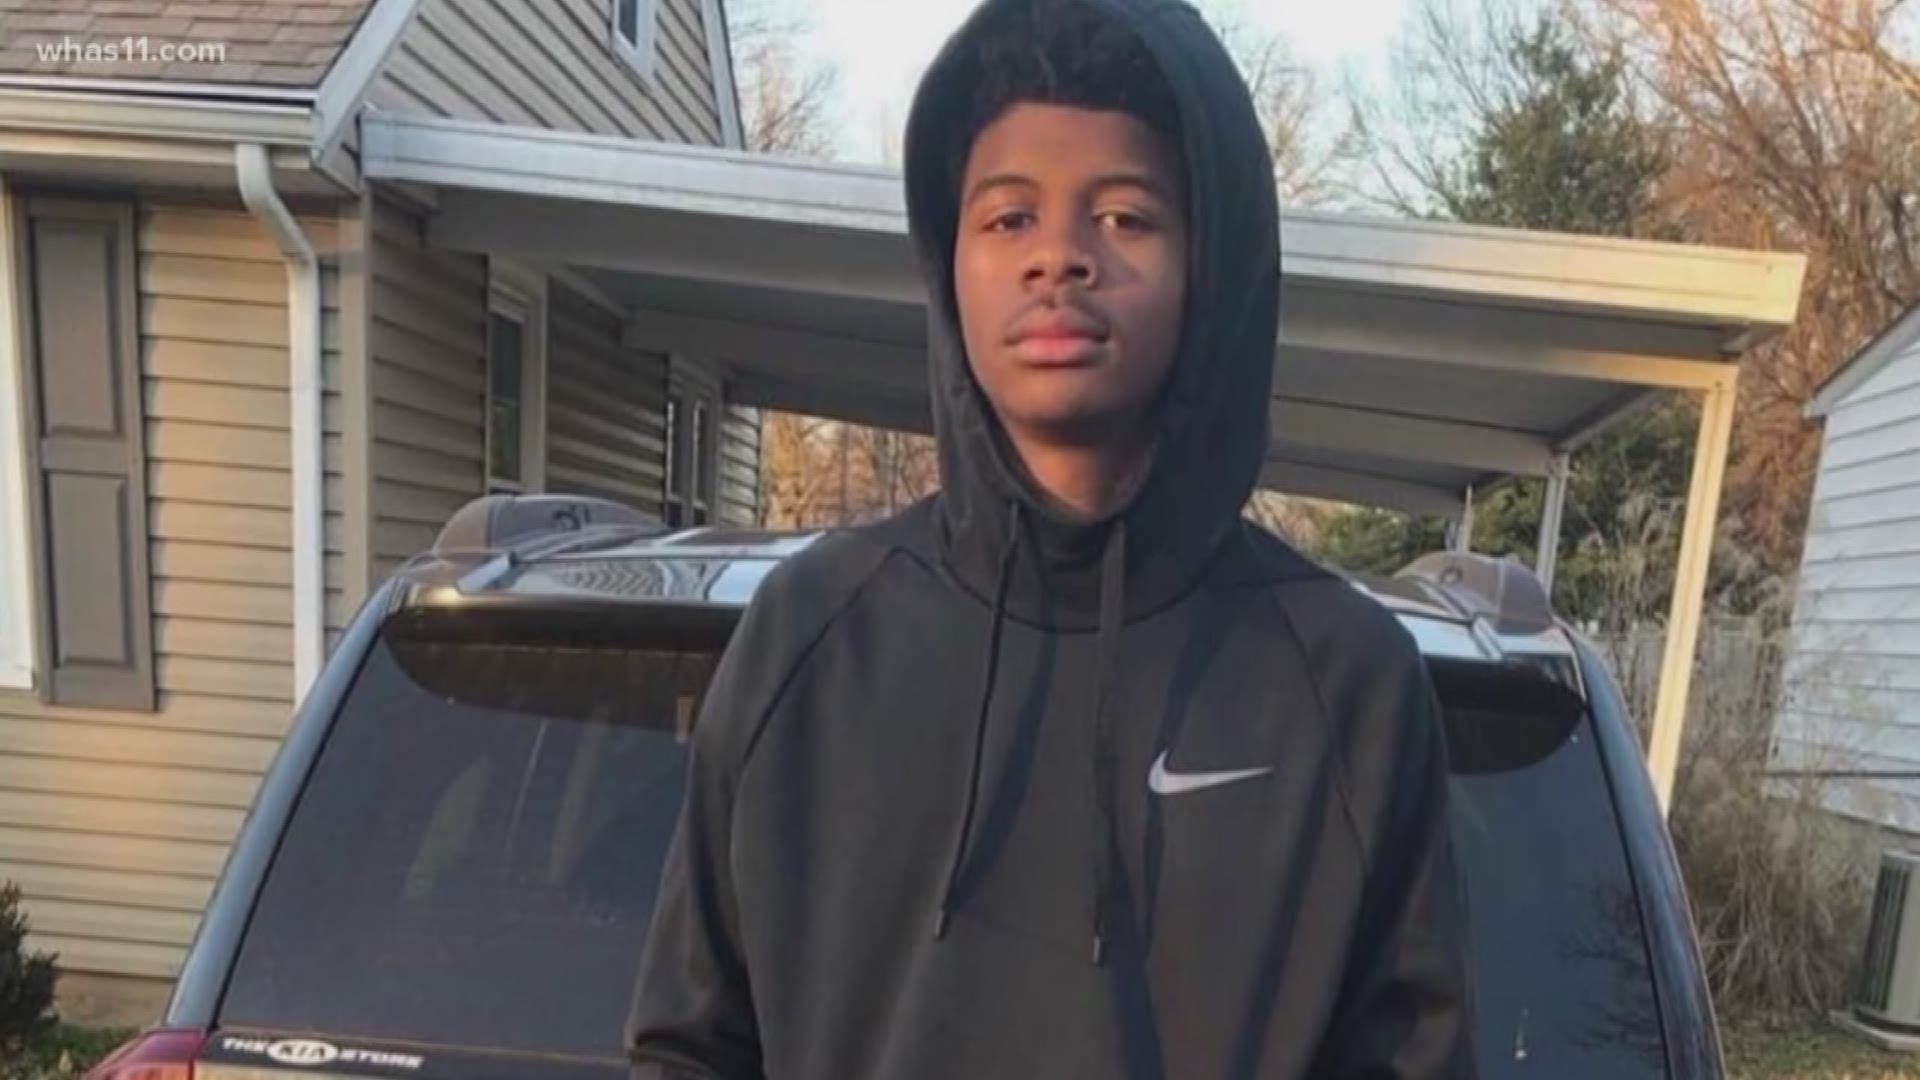 Decorian Curry was hit by a stray bullet in the Shawnee neighborhood while sitting on the porch with his friend. His mother is still looking for answers nearly two months later.